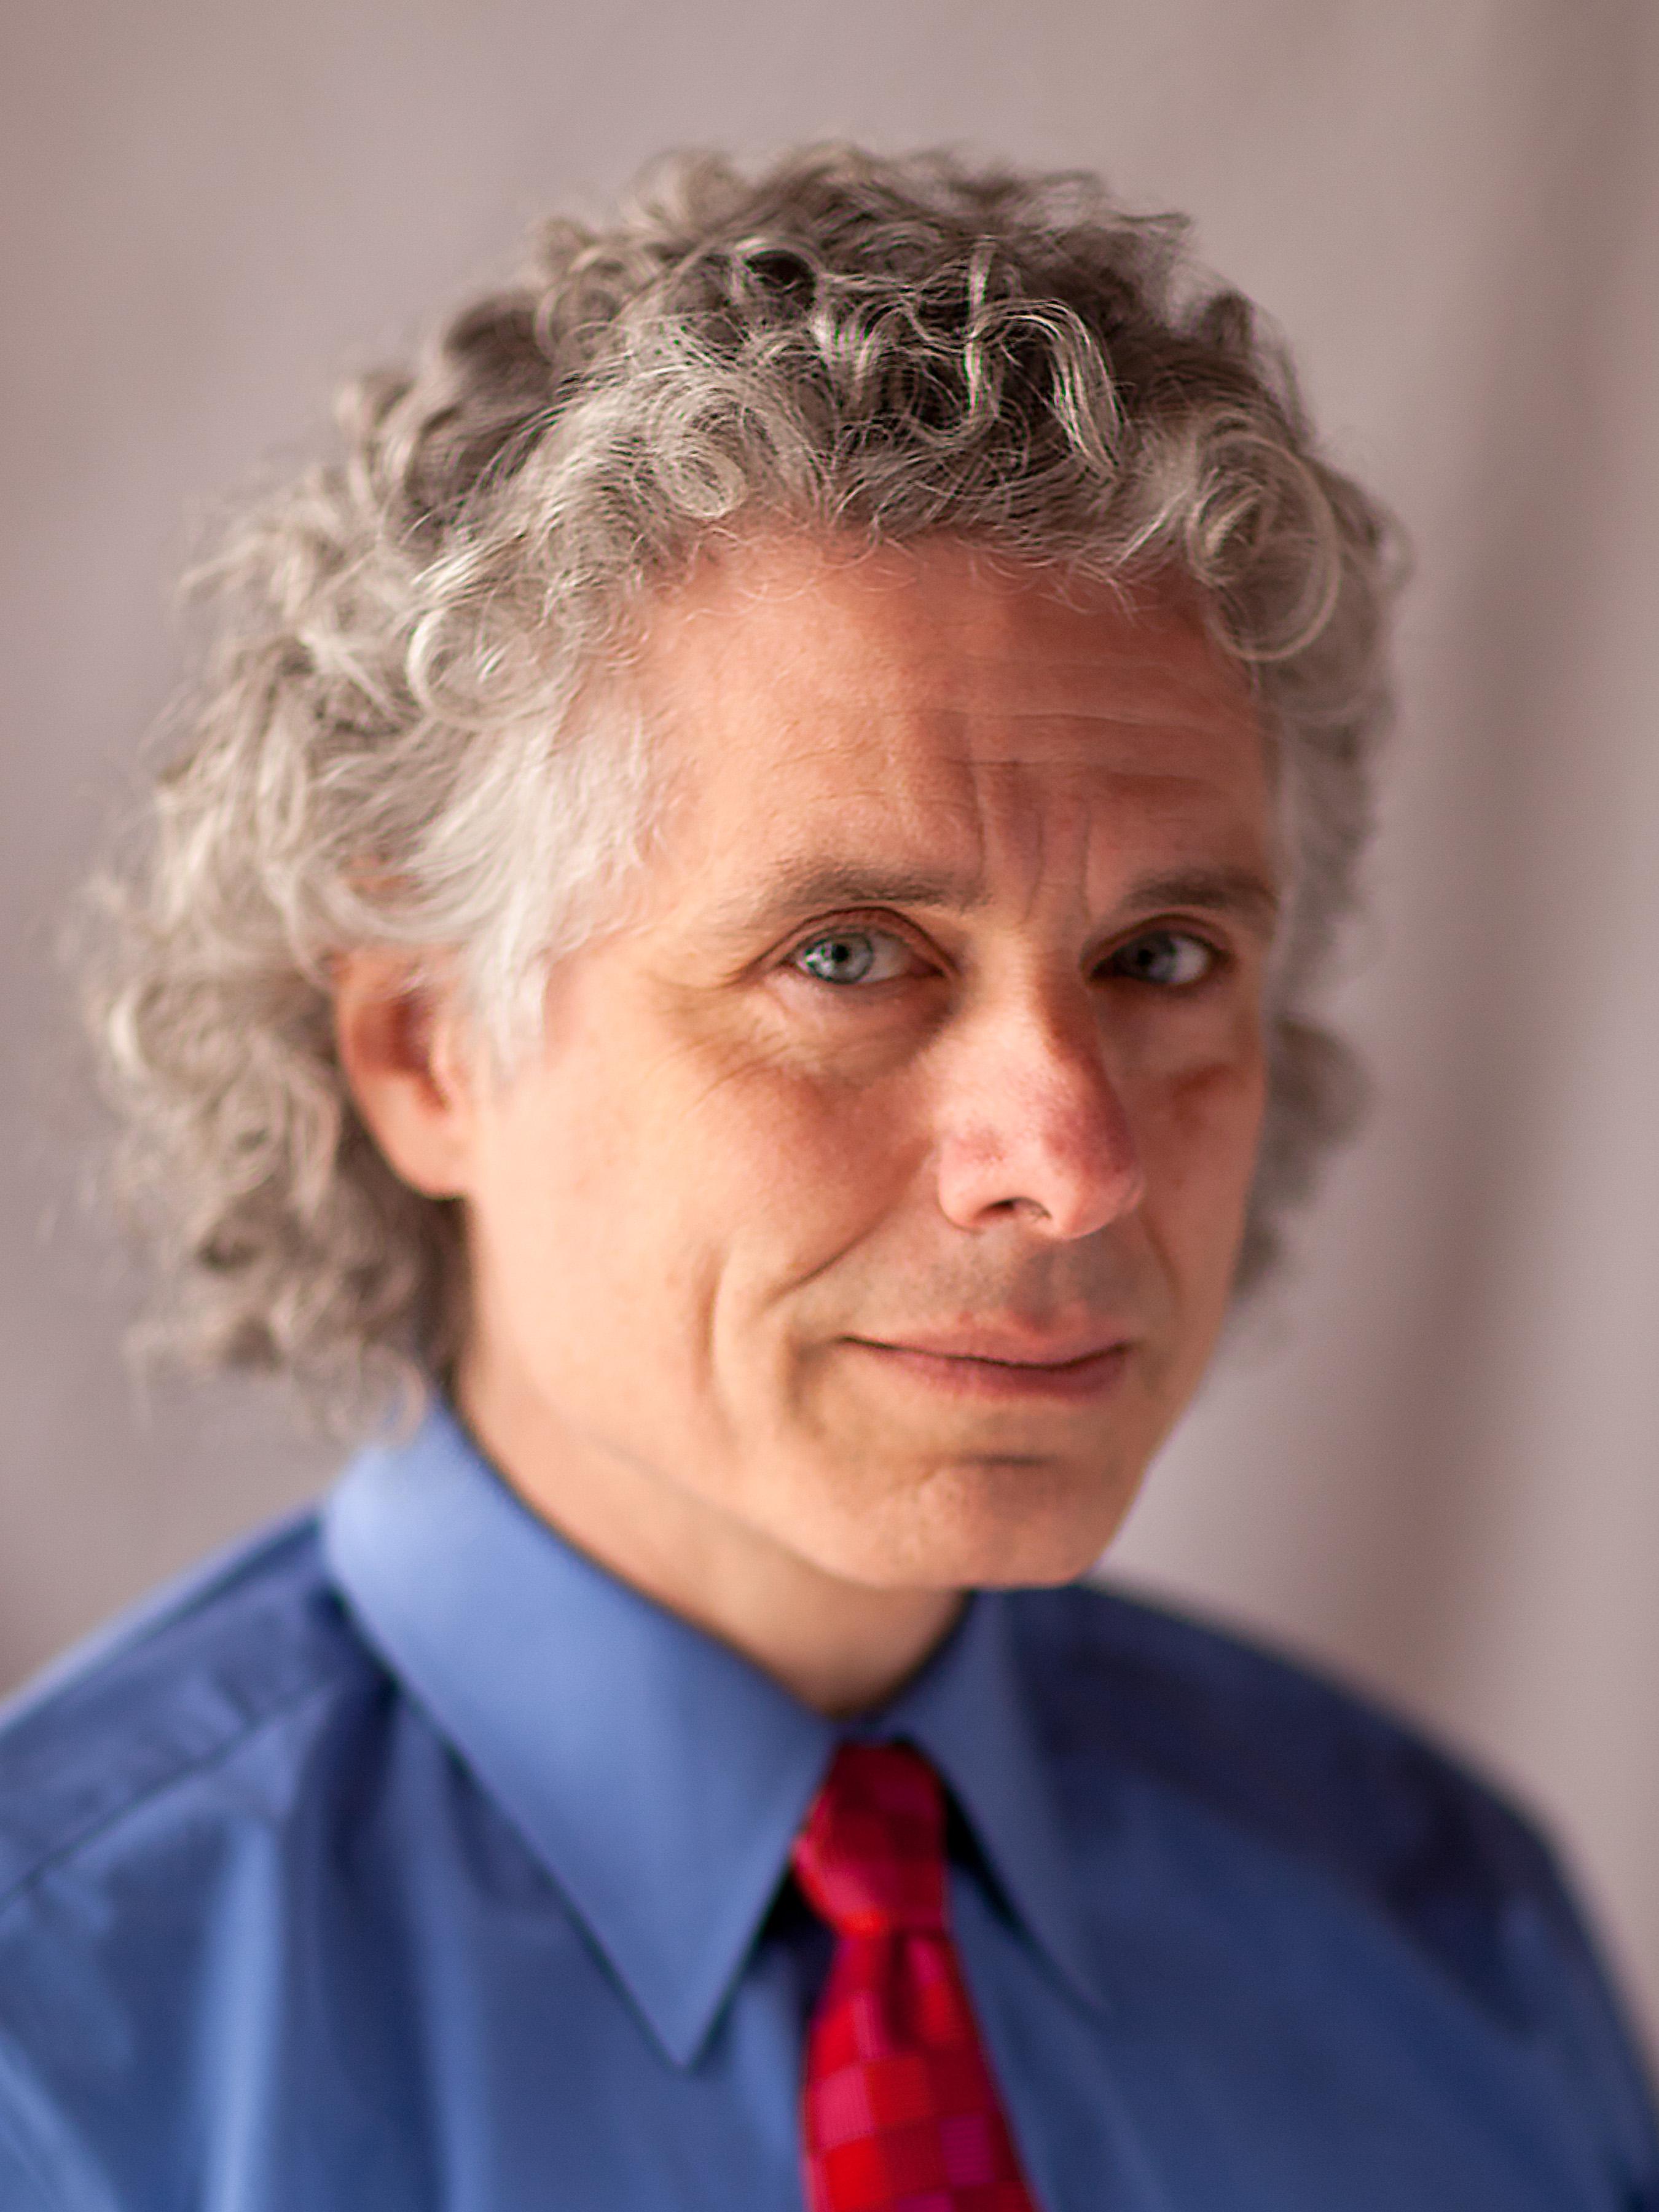 Steven Pinker on ‘The Better Angels of Our Nature’ (Video)